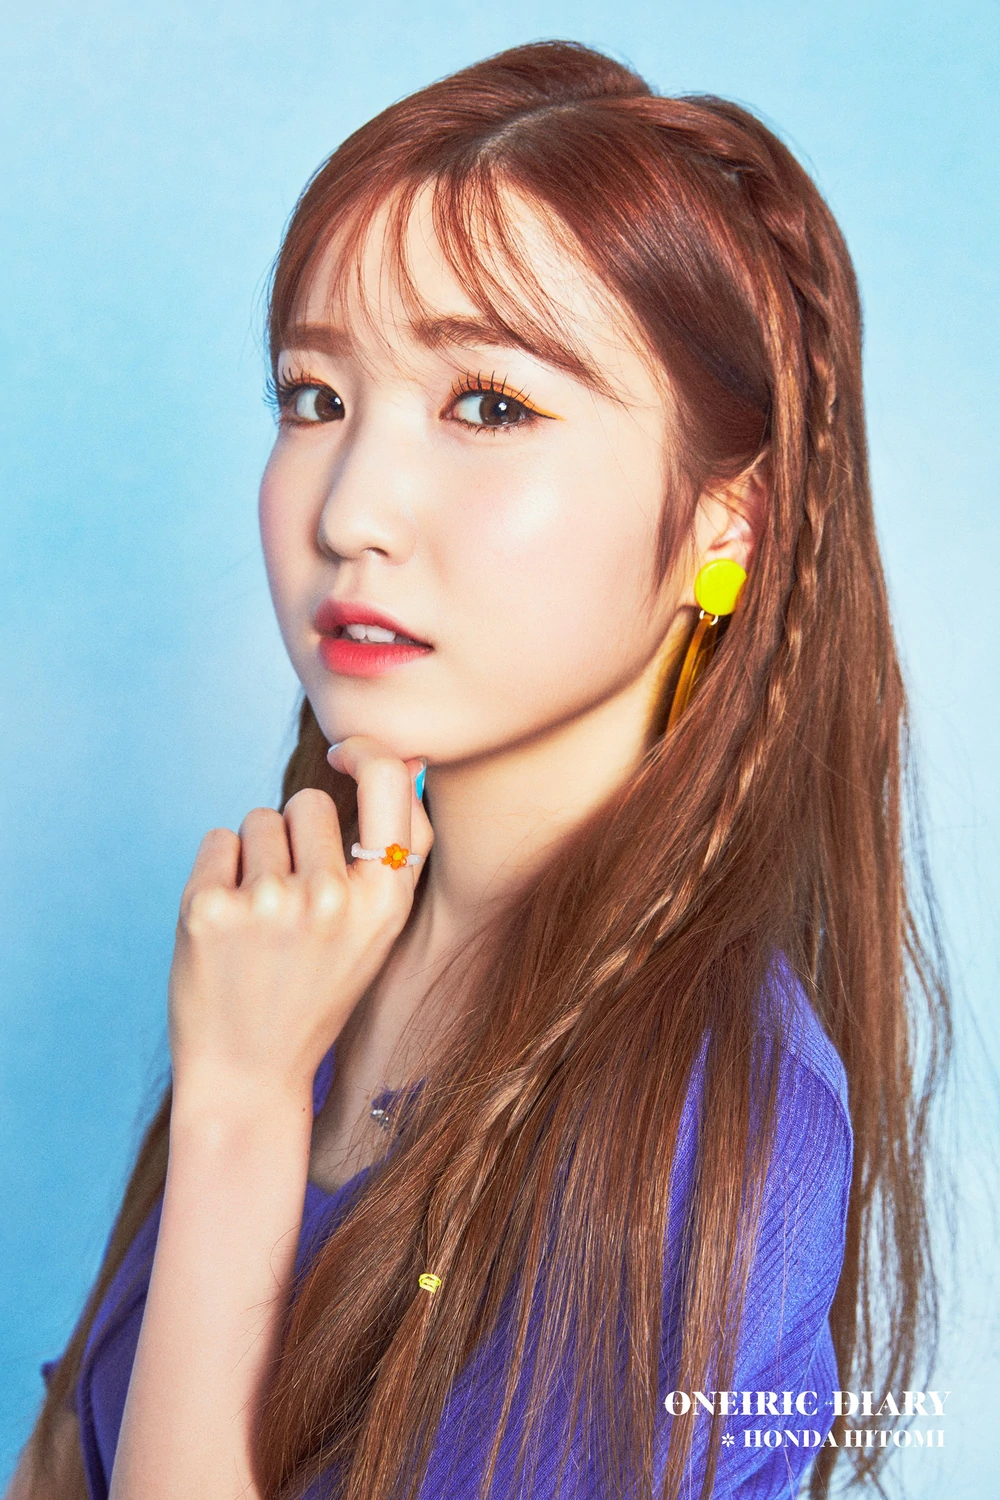 IZ*ONE Oneiric Diary Hitomi Concept Teaser Picture Image Photo Kpop K-Concept 2